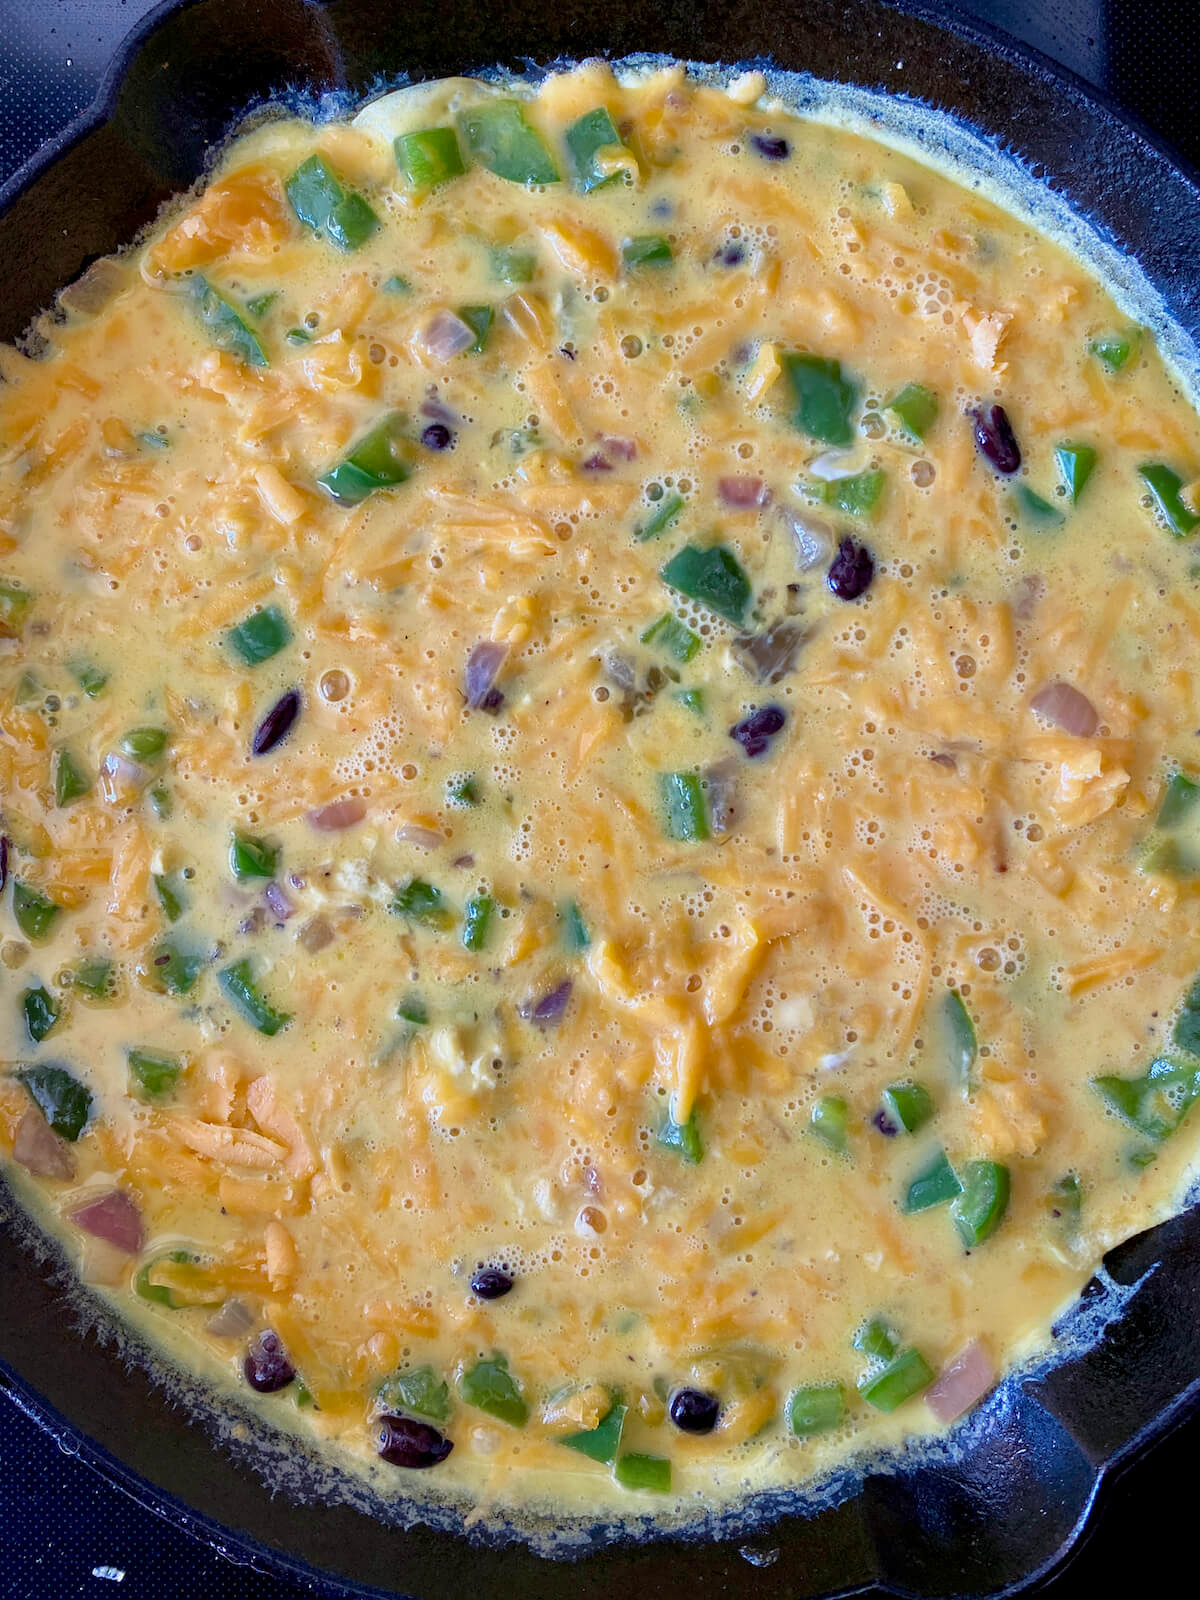 Raw eggs, sautéed vegetables, and cheddar cheese in a cast iron skillet on the stovetop. The edges of the egg mixture are just set.